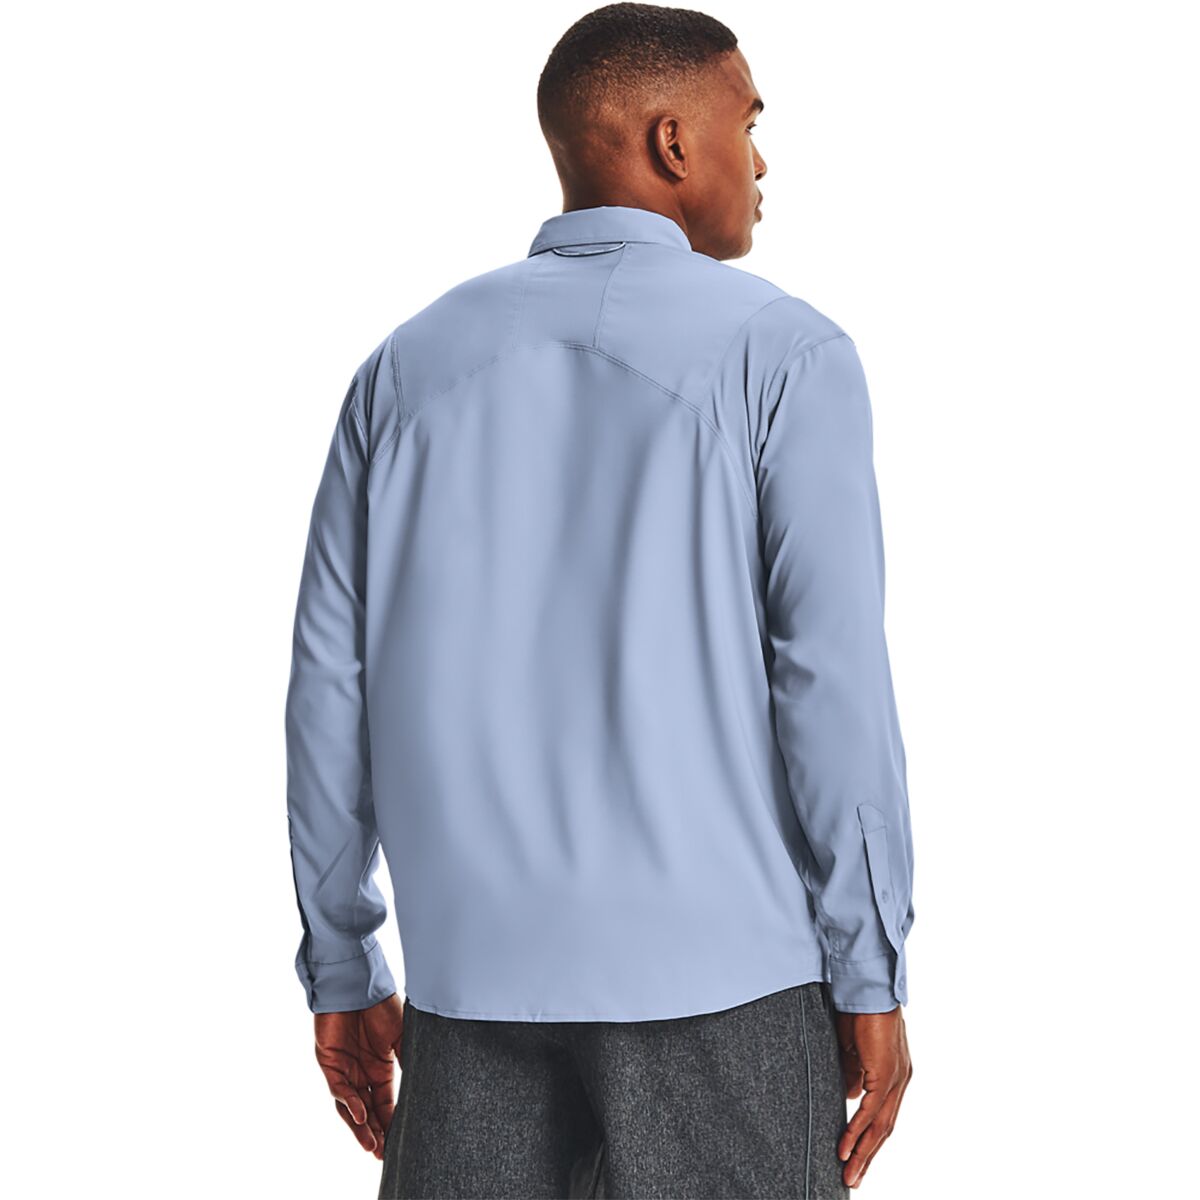 Under Armour Tide Chaser 2.0 Long-Sleeve Shirt - Men's - Clothing